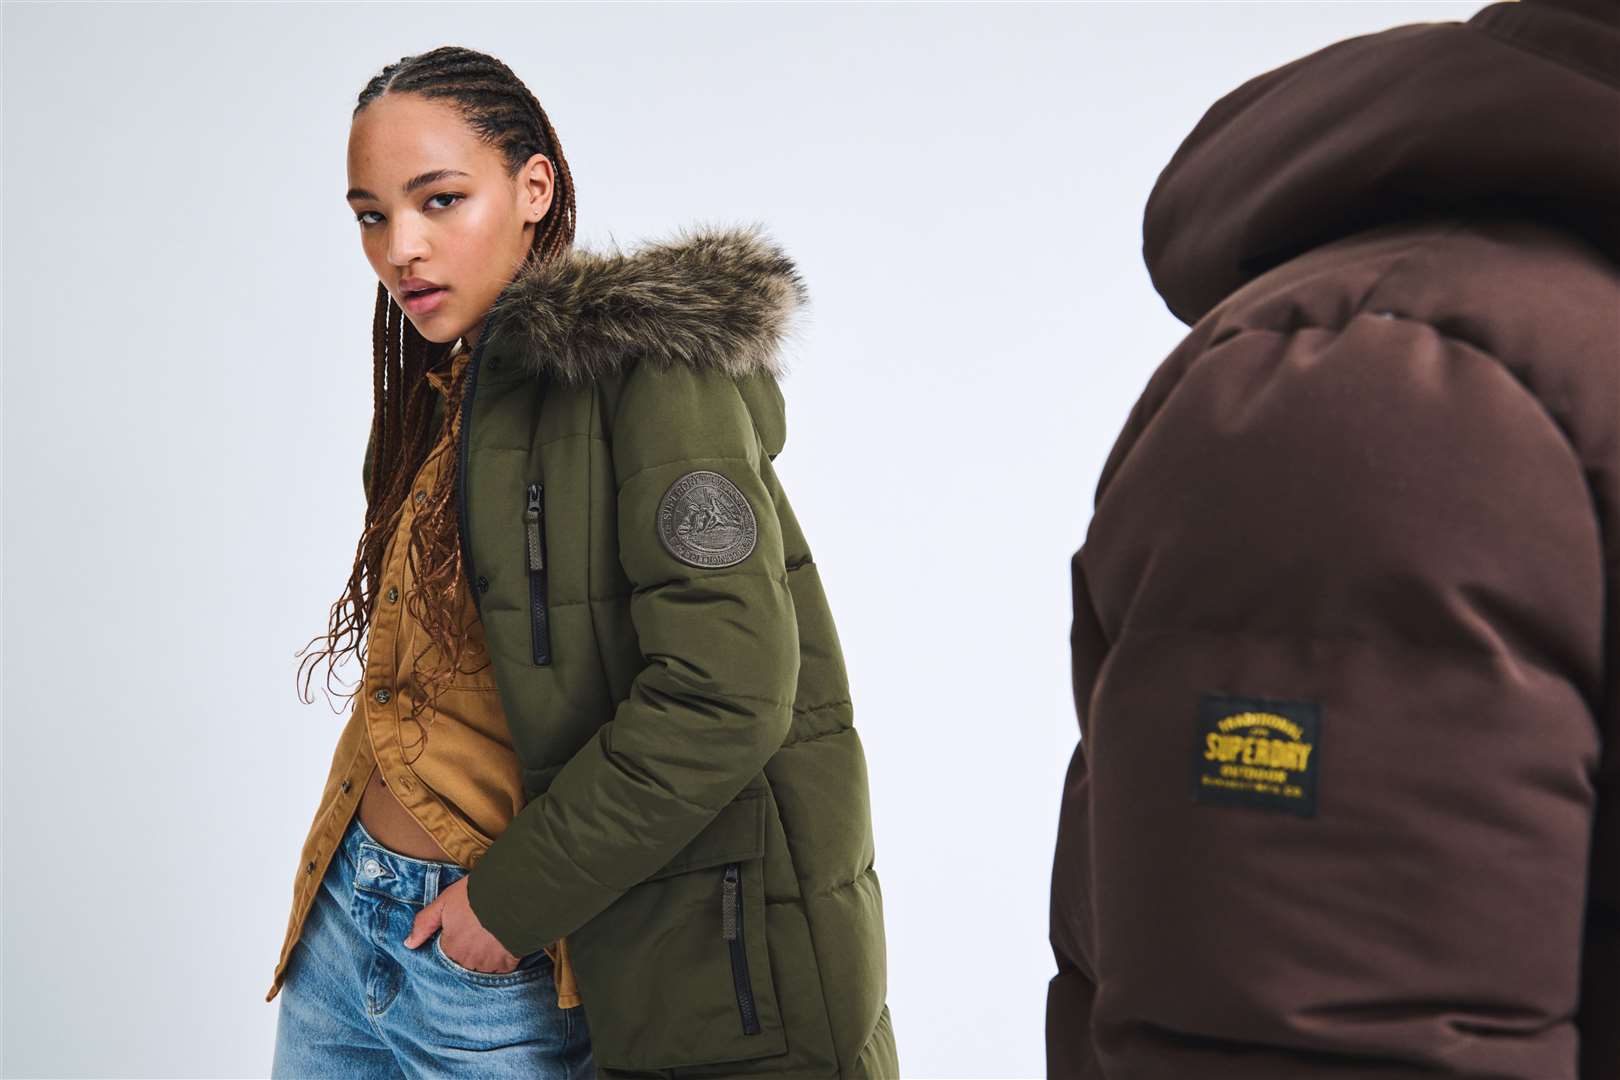 Superdry said unusually mild autumn weather had delayed sales of its autumn/winter clothing range (Superdry/PA)